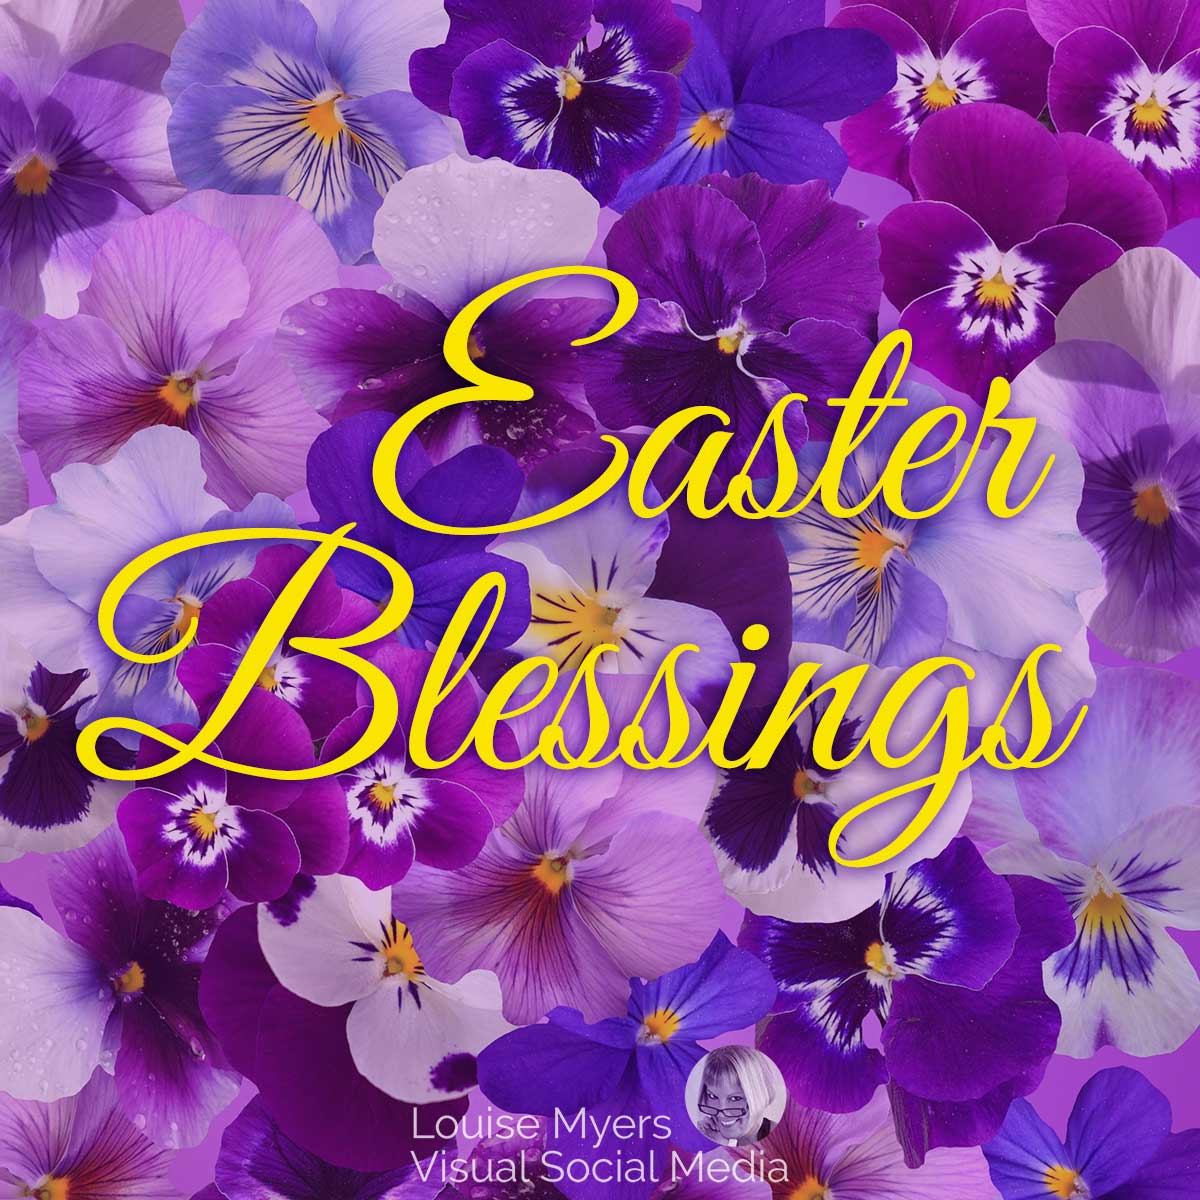 purple panssies says easter blessings in script font.